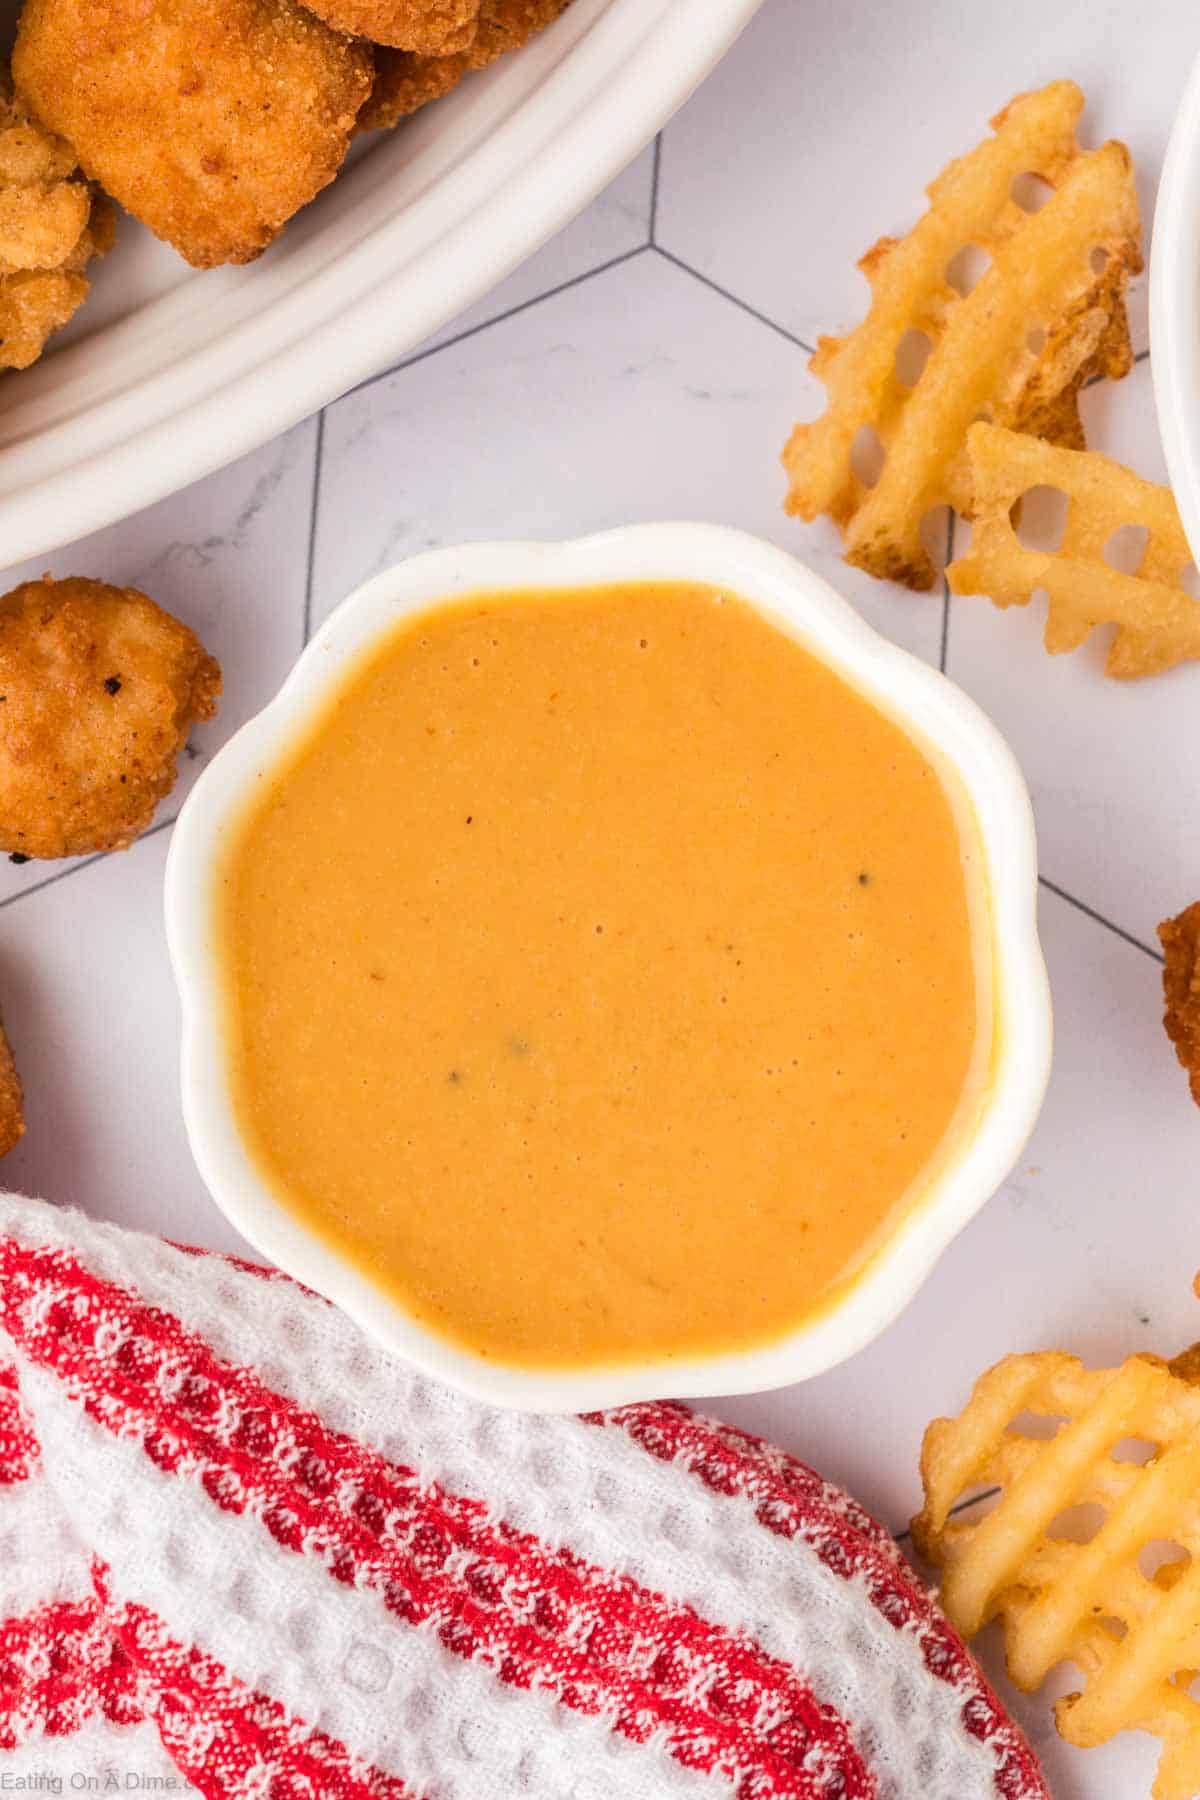 Chick Fil A Sauce in a bowl with a side of French Fries